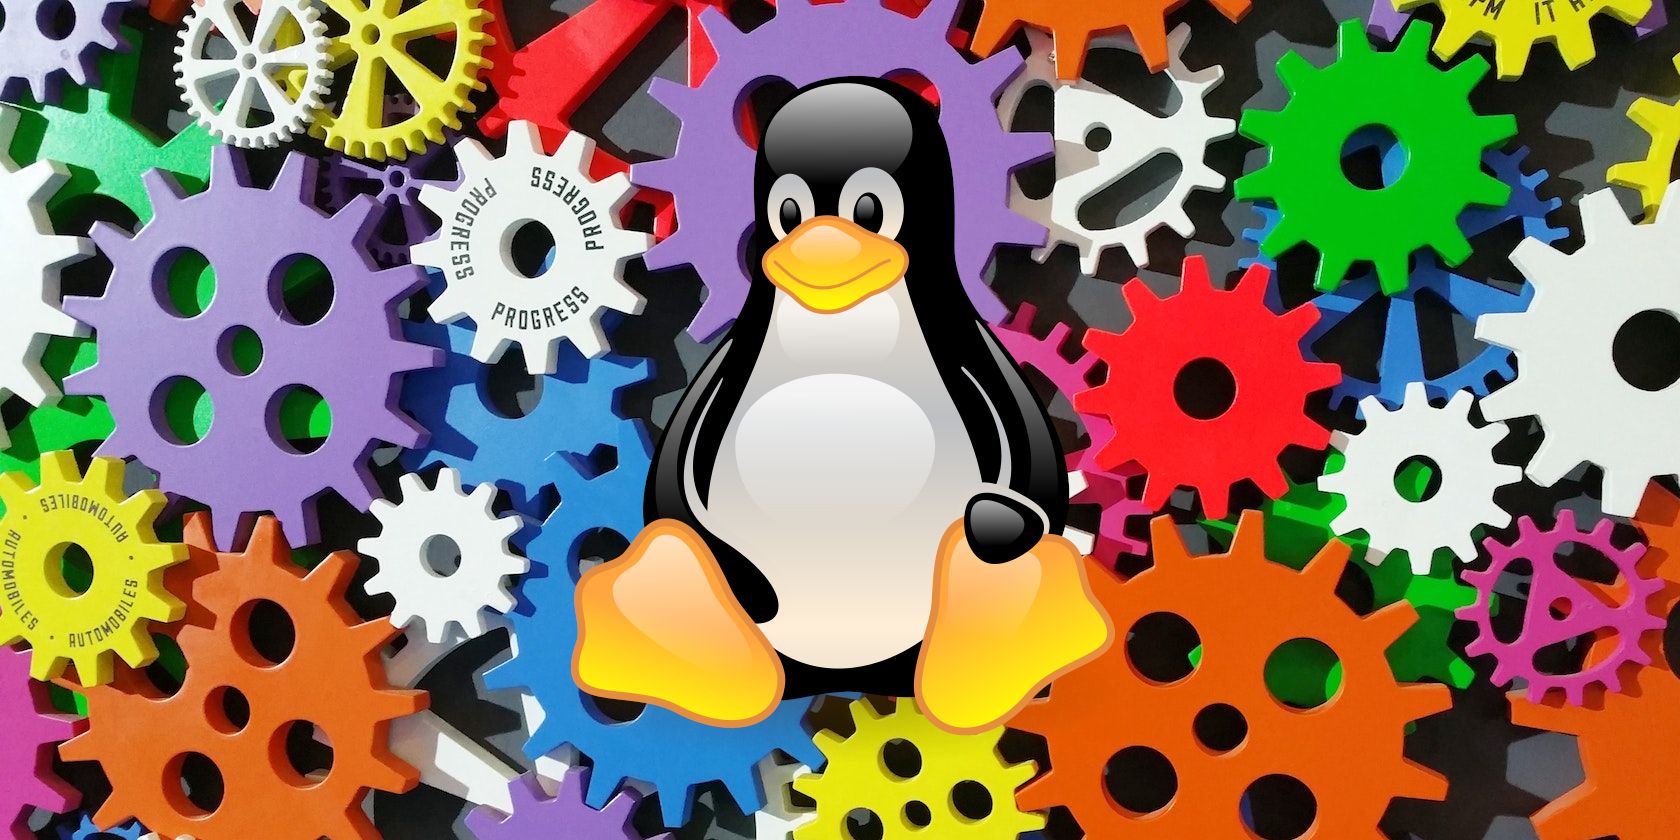 Linux Tux on gears background